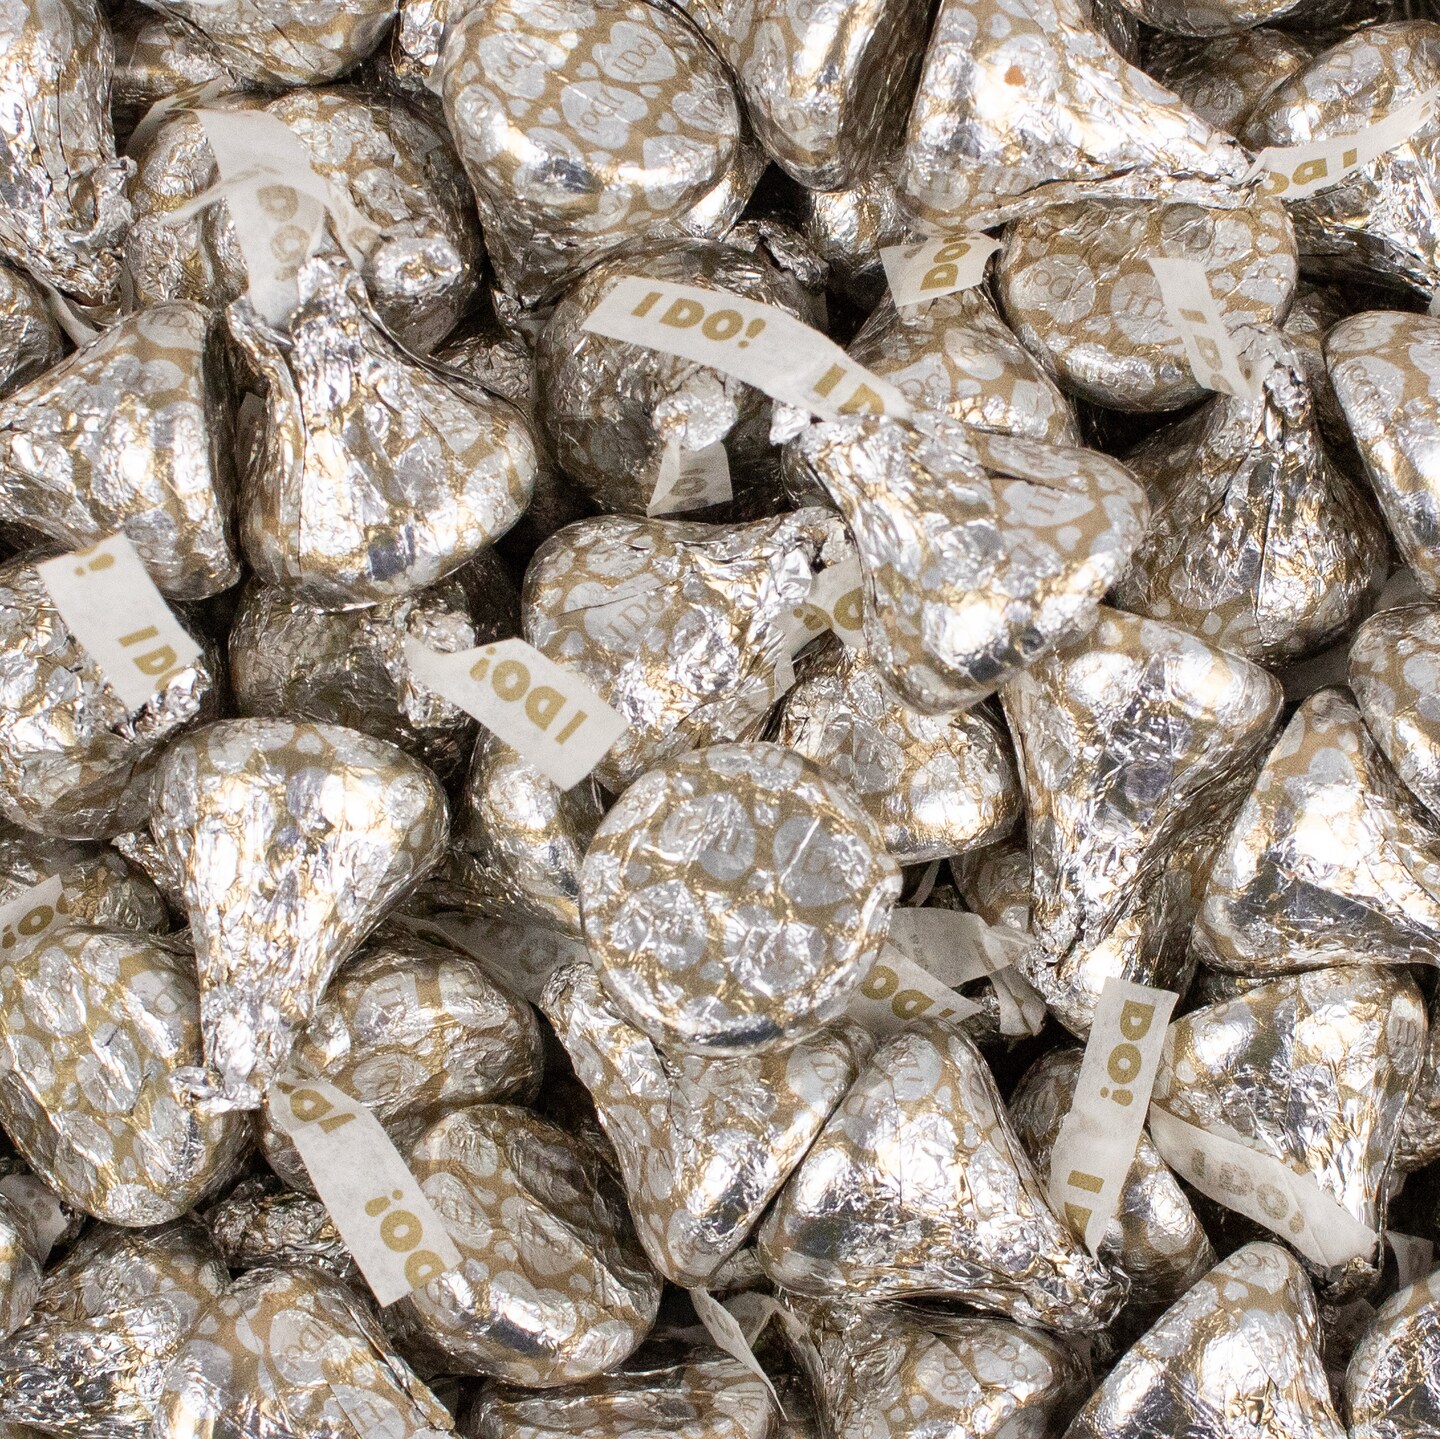 300 Pcs Wedding Candy Hershey&#x27;s Kisses with I Do Plumes (3 Lbs, Approx. 300 Chocolate Candies)